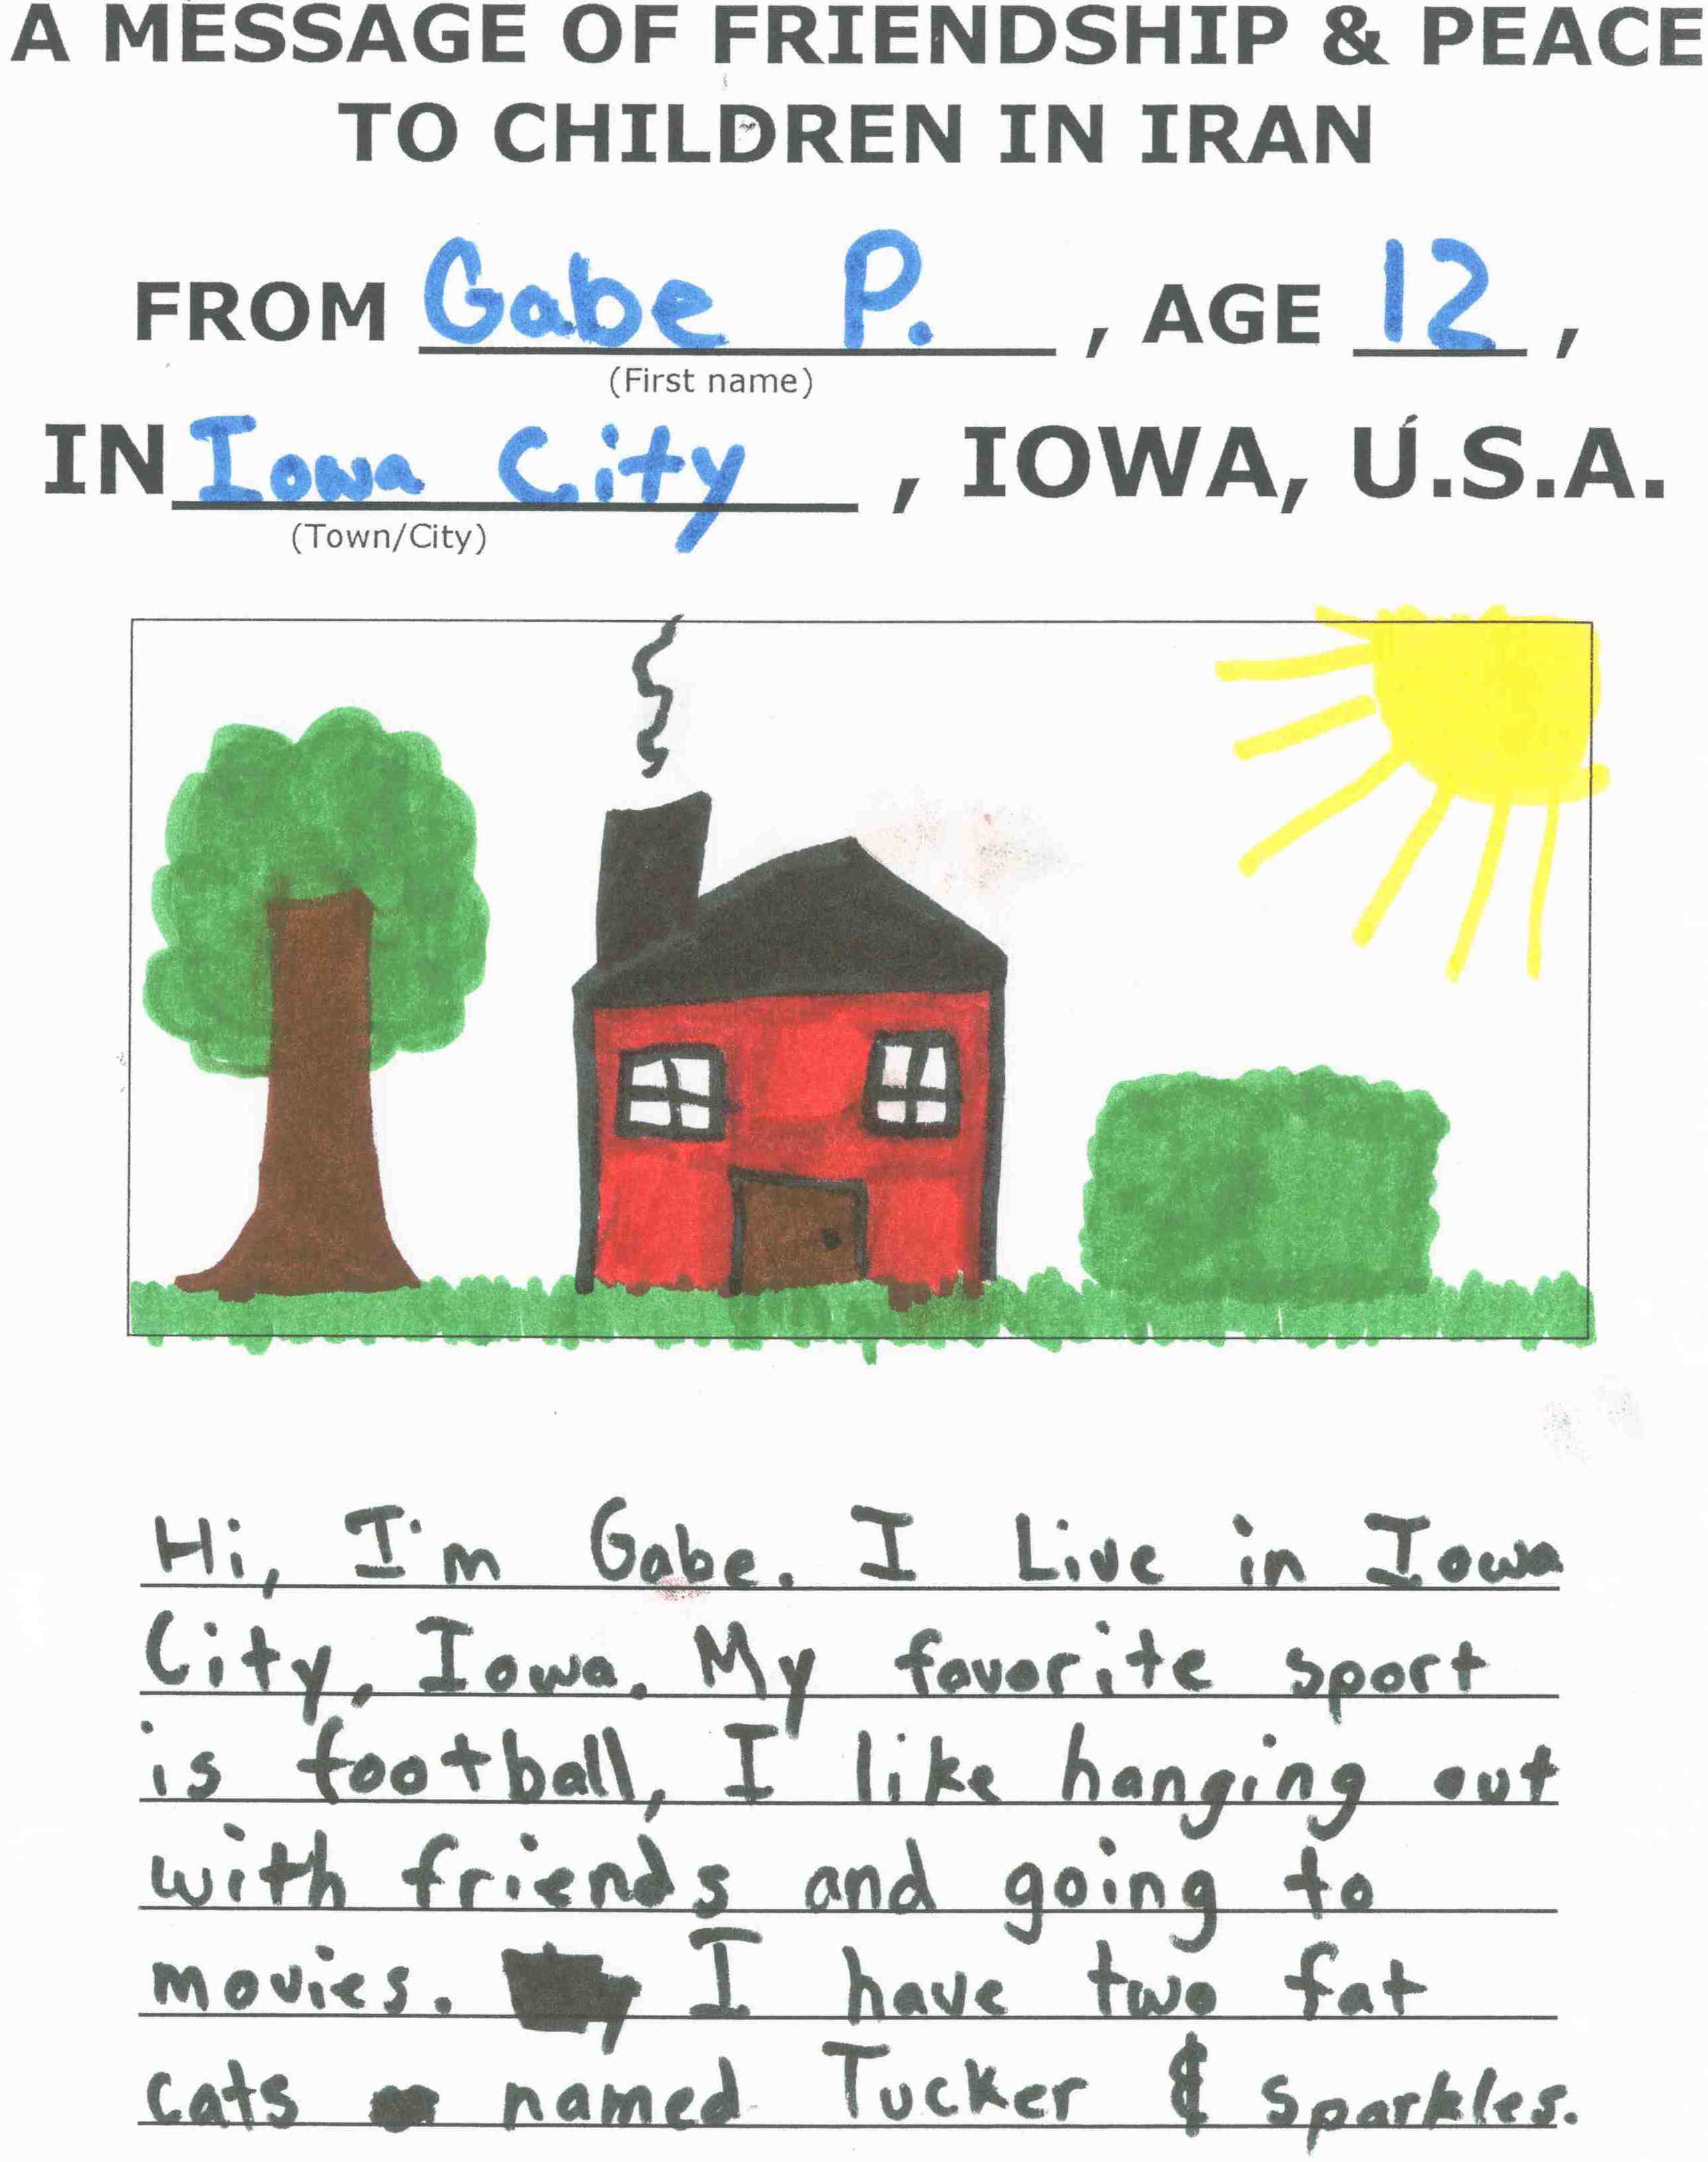 Hi, I'm Gabe.  I live in Iowa City, Iowa.  
My favorite sport is football, I like hanging out with friends and going to movies.  
I have two fat cats named Tucker & Sparkles.